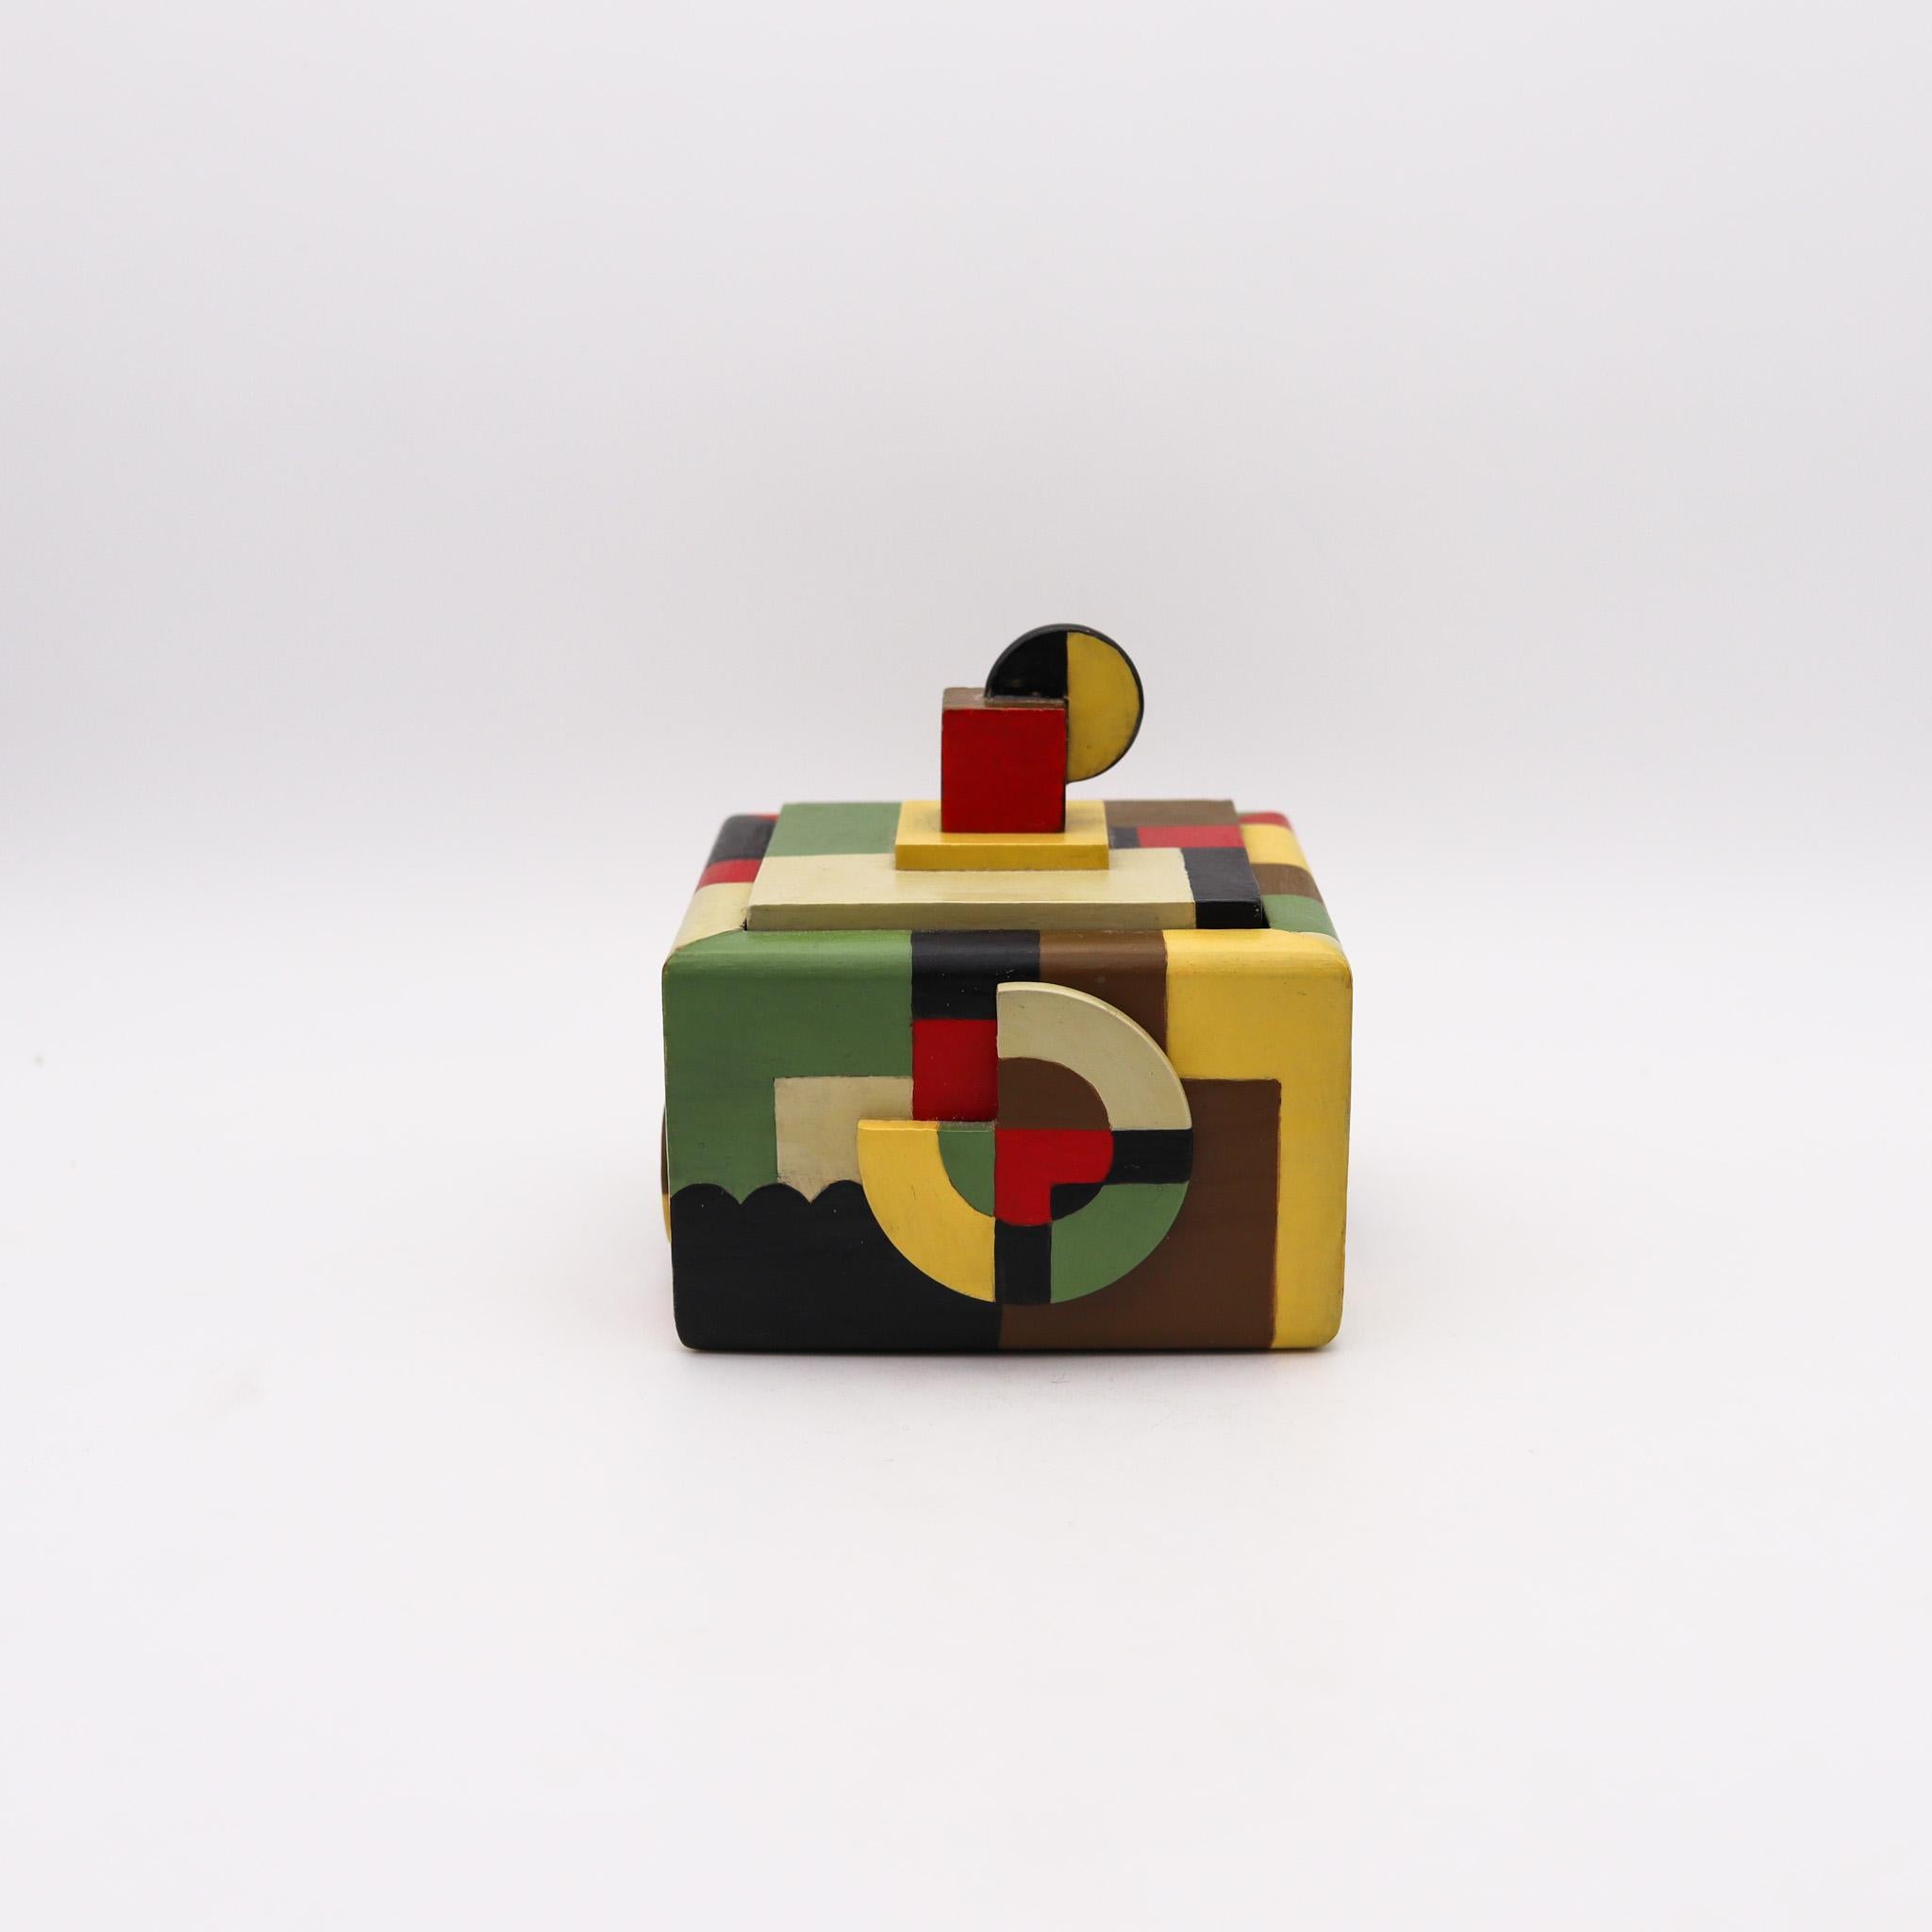 De Stijl trinket box in wood

Fabulous colorful trinket box, created in the northern region of Europe, probably in the Netherlands or Germany. It was crafted with the De Stijl artistic parameters in wood with polychromate paints of different